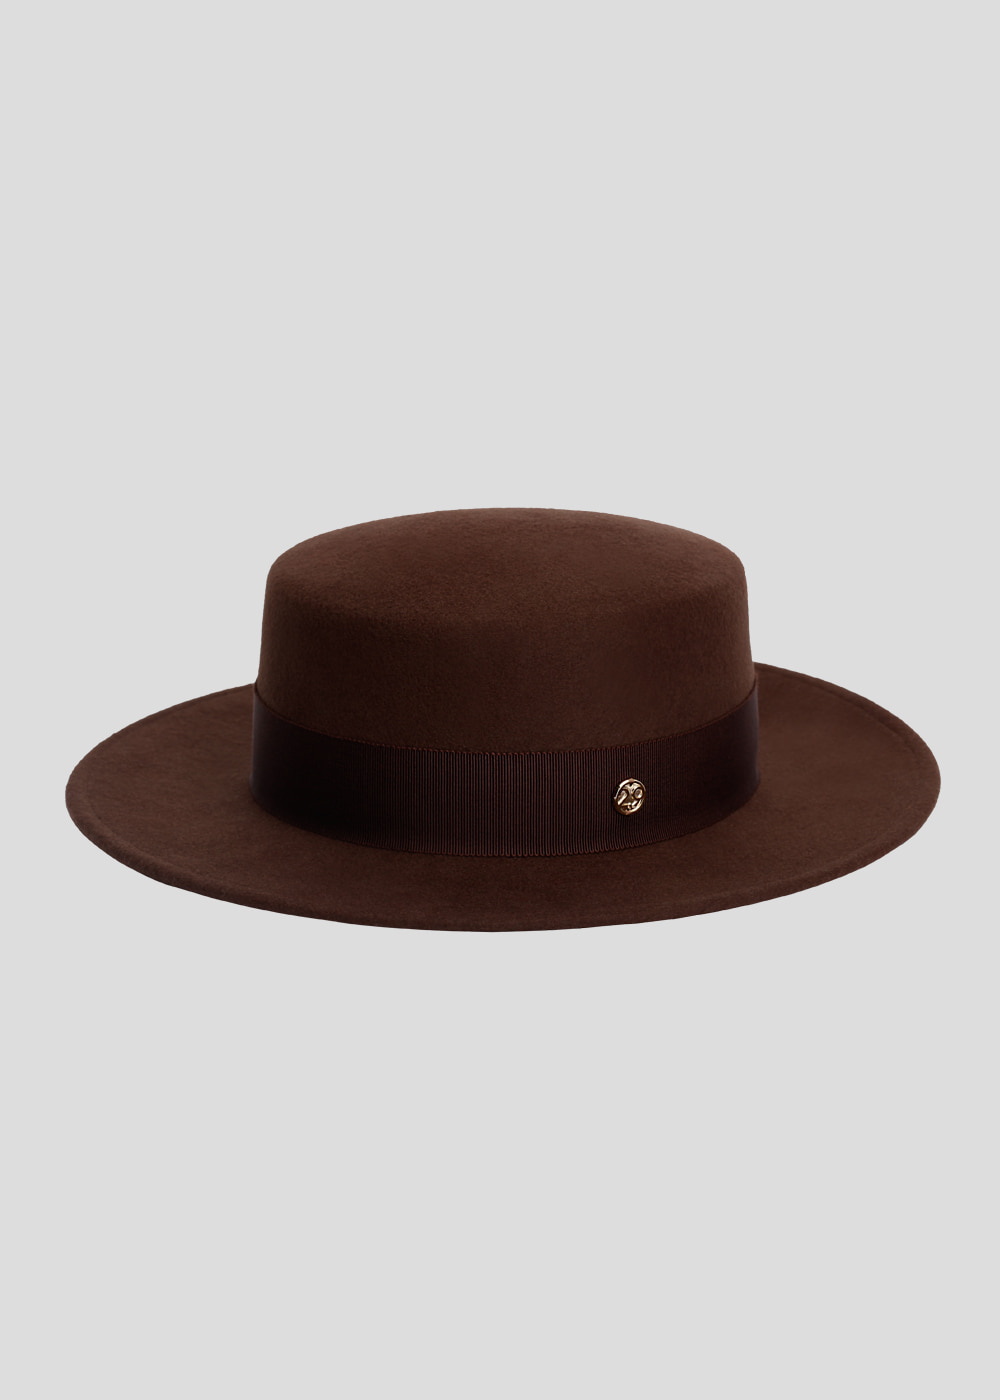 [sold out] classic boater dark brown/ dark brown